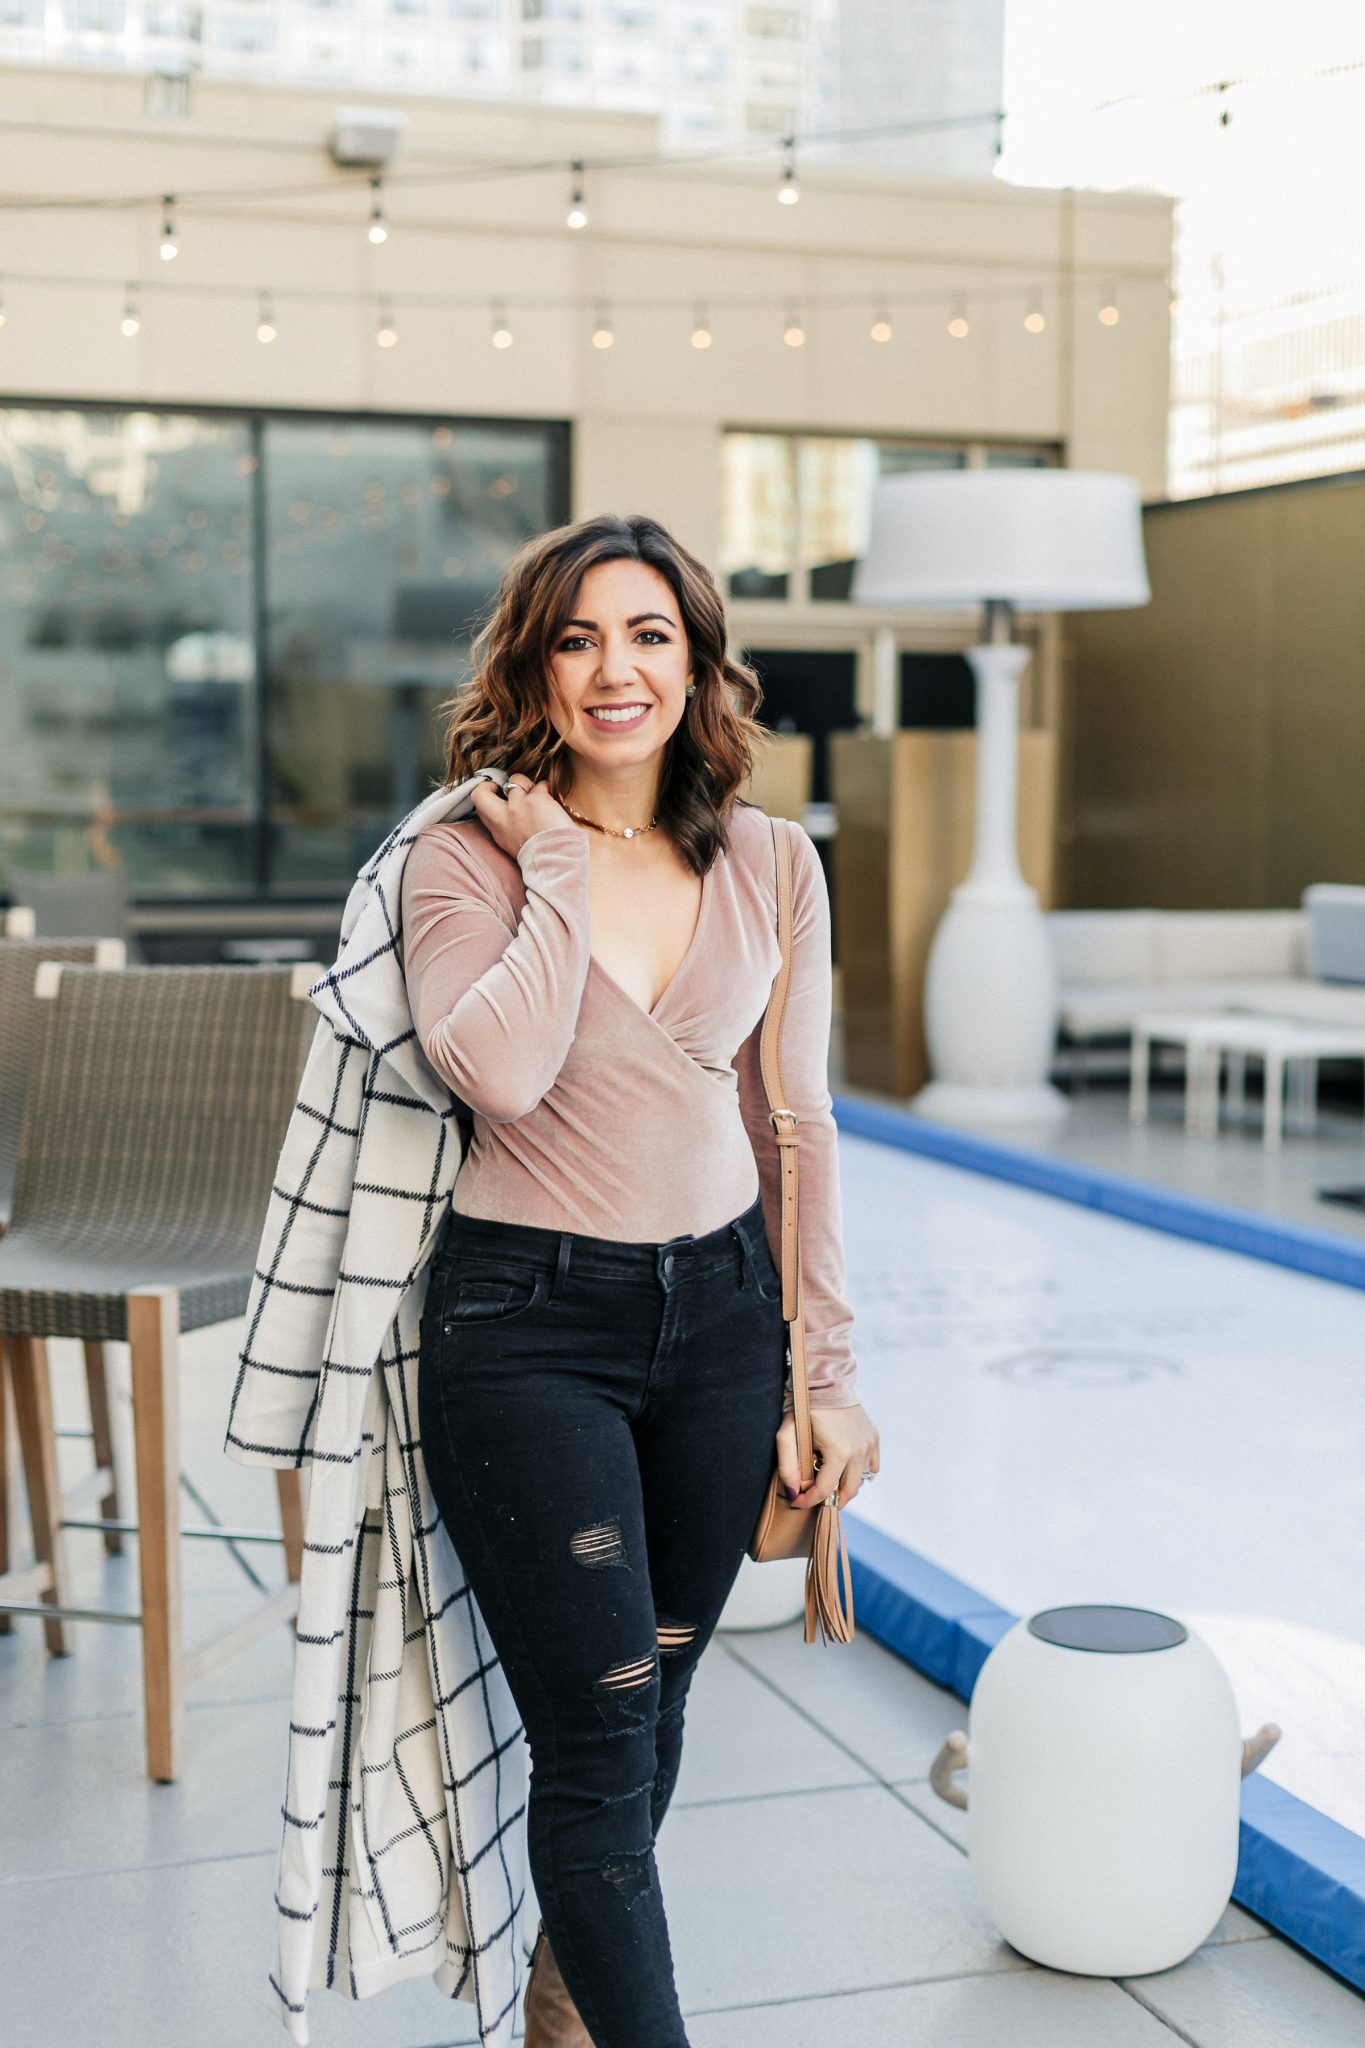 Lifestyle blogger Roxanne of Glass of Glam wearing a windowpane duster coat, velvet bodysuit, distressed denim, and a Gucci soho disco bag - SheIn windowpane duster coat by popular Washington fashion blogger Glass of Glam